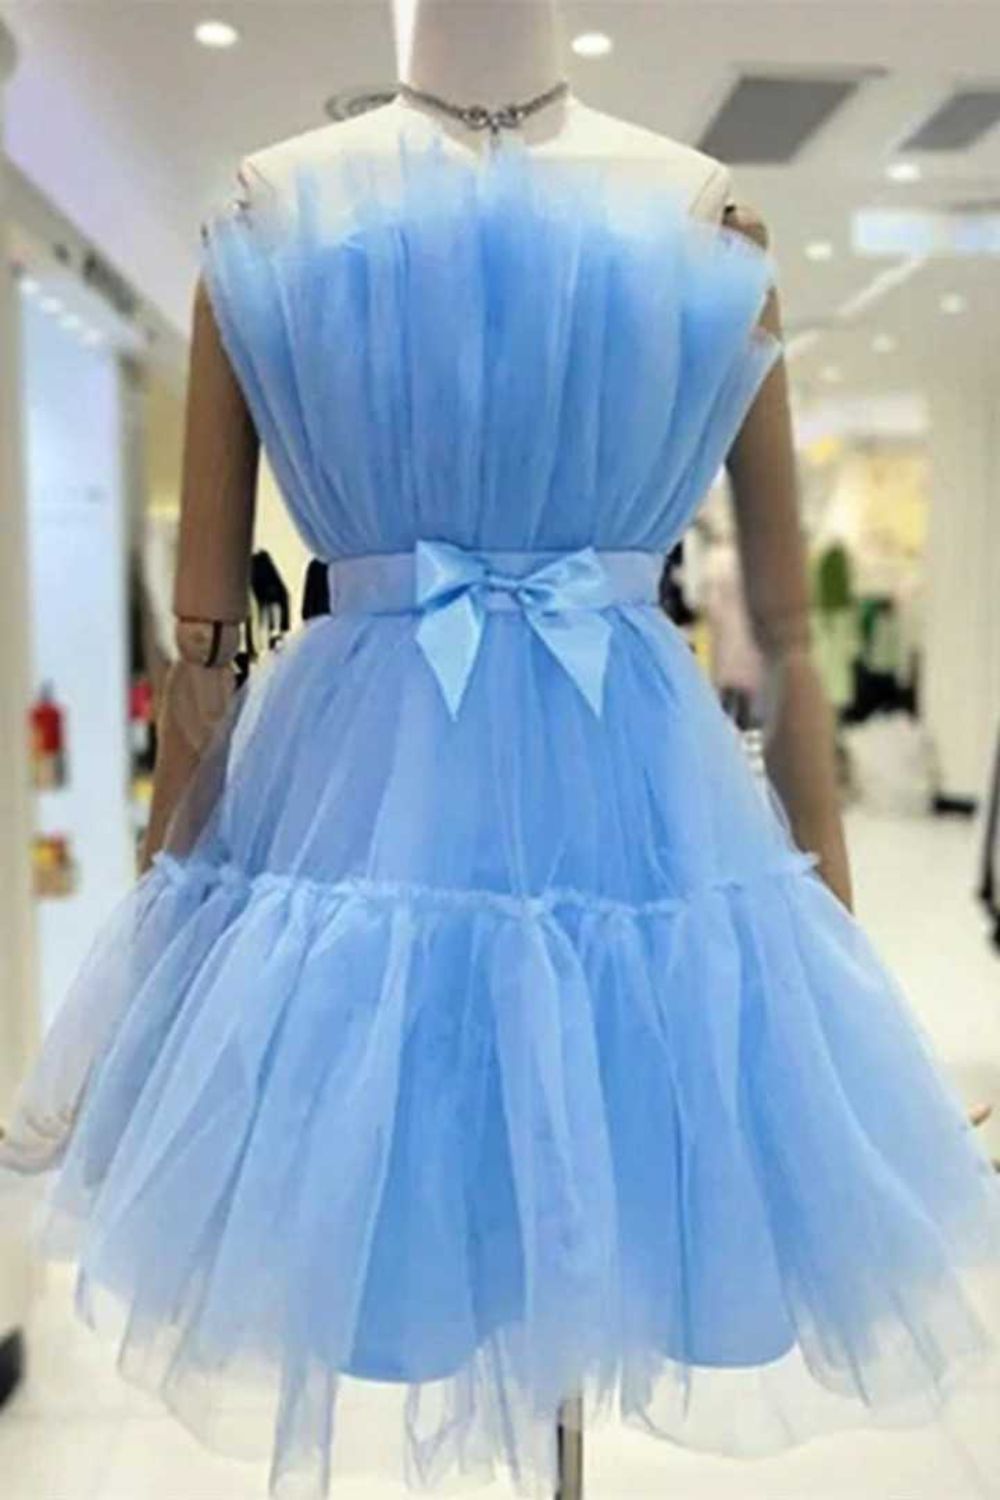 A Line Pink Tulle Above-Knee Homecoming Cocktail Dress With Bowknot